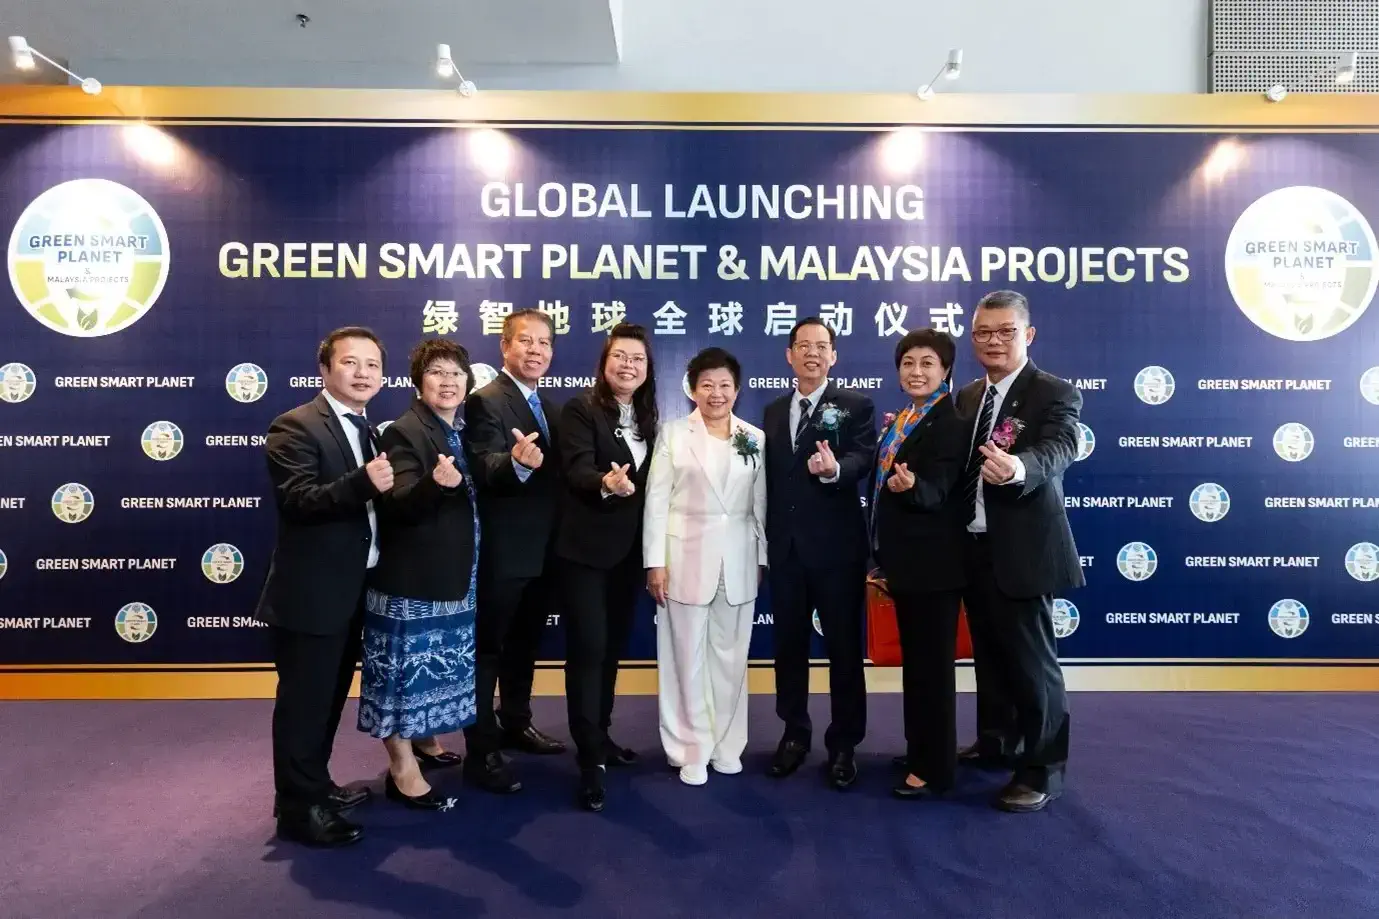 Global Launching Green Smart Planet and Malaysia Projects